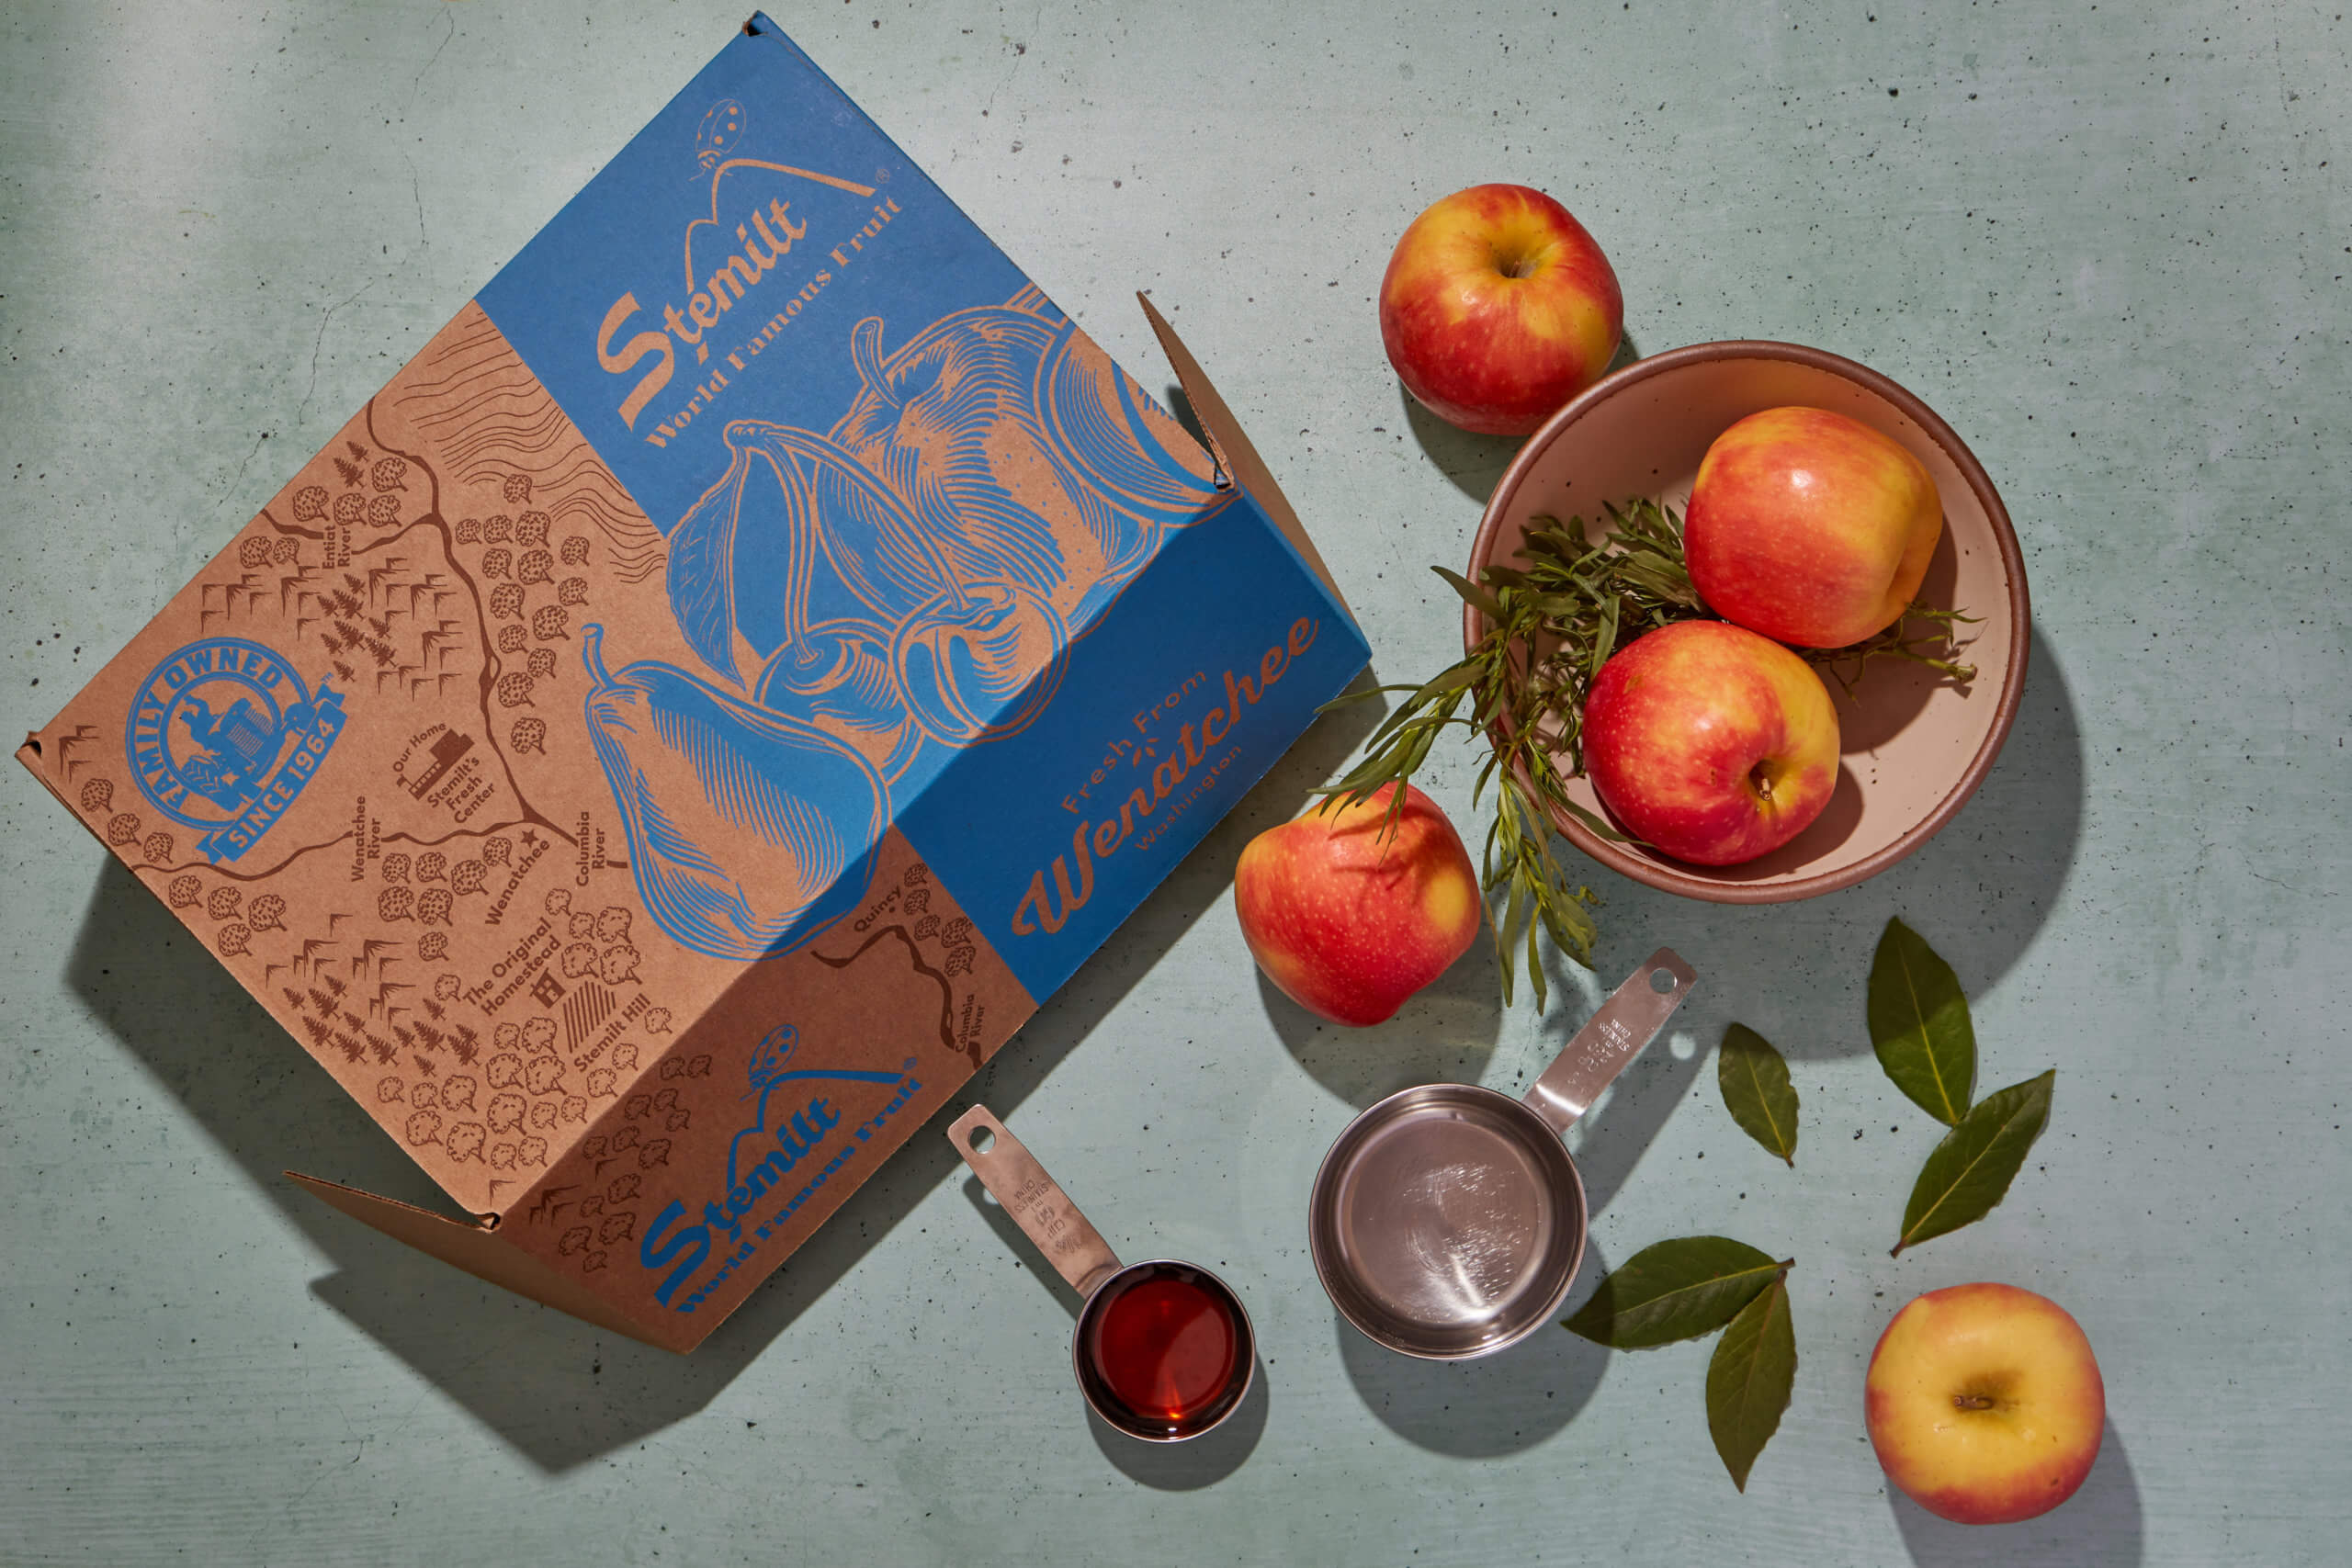 Apples with fresh bay leaves and rosemary, next to a Stemilt box.